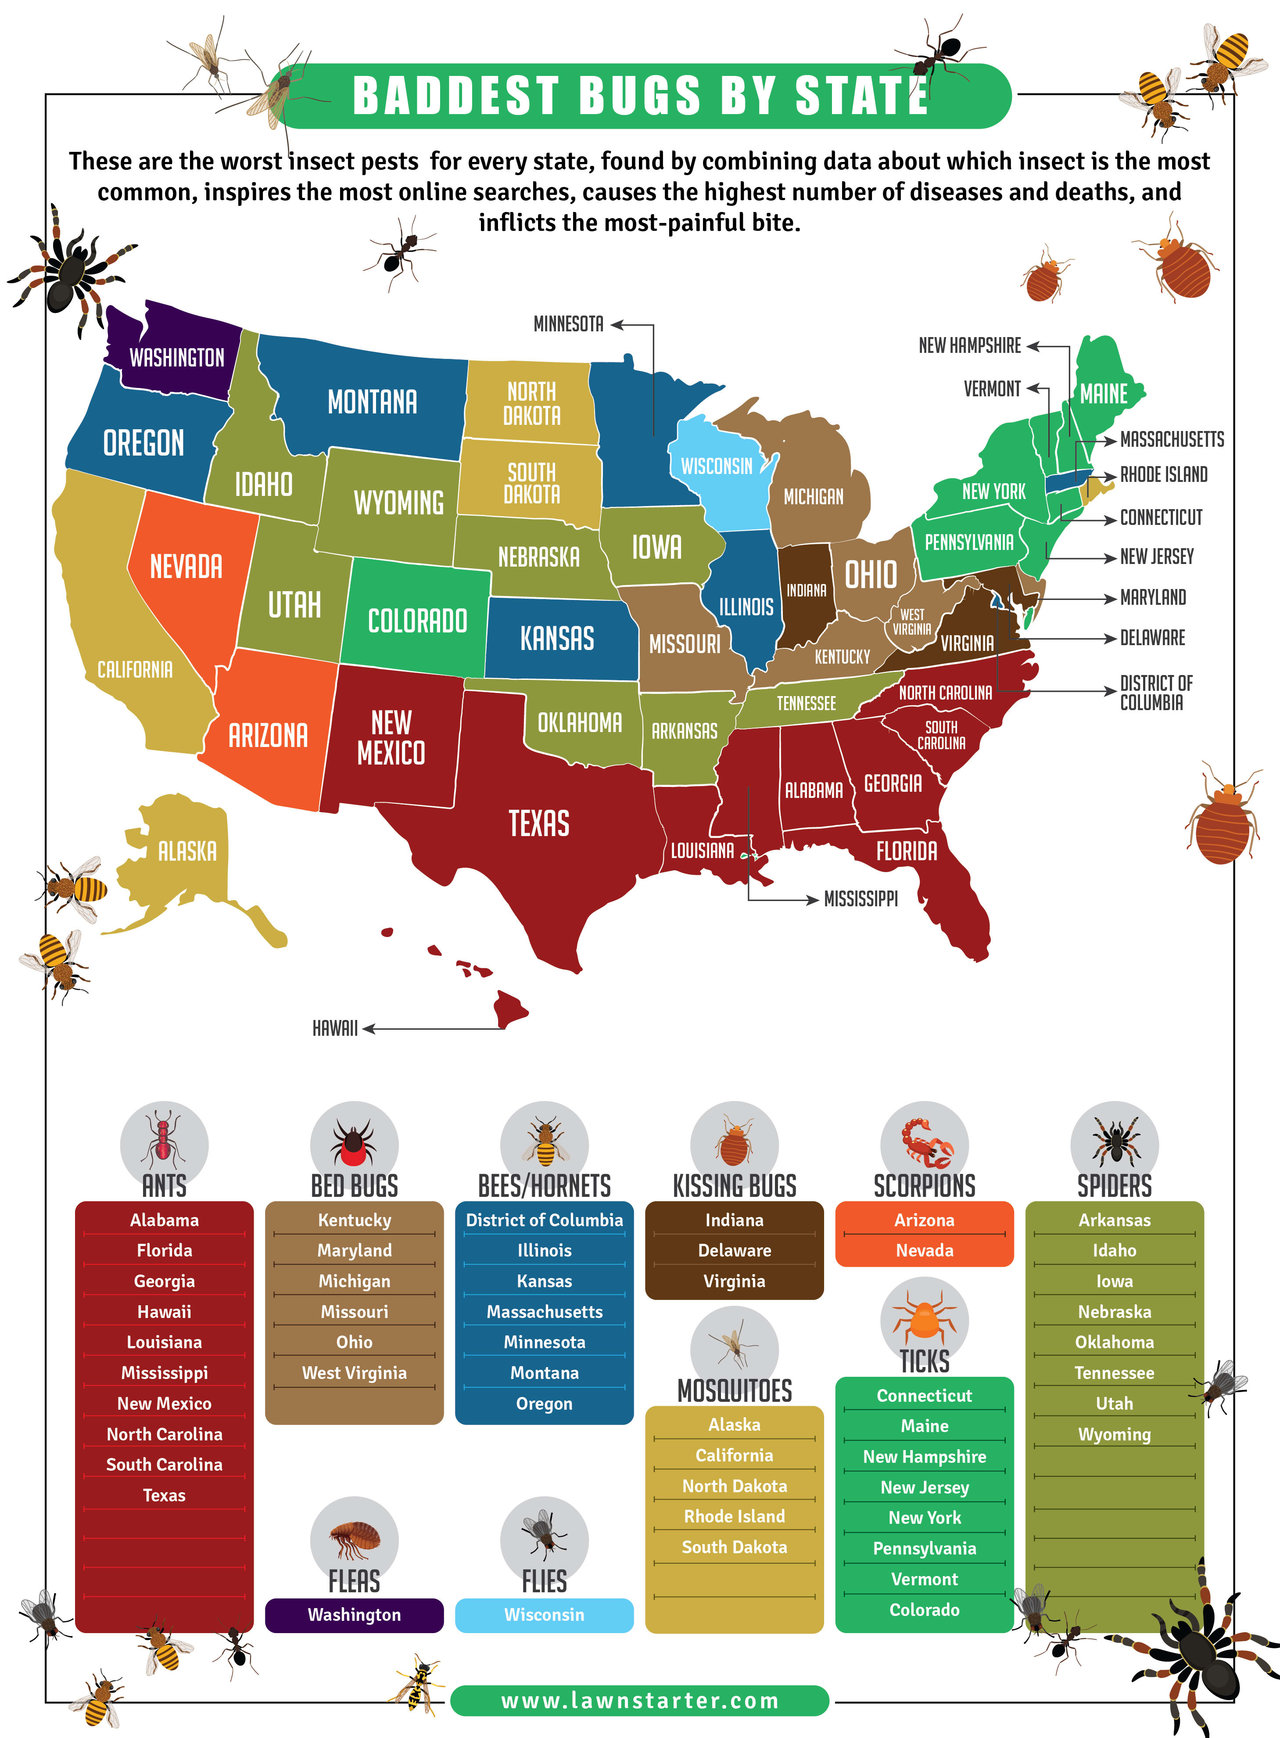 Baddest bugs by state